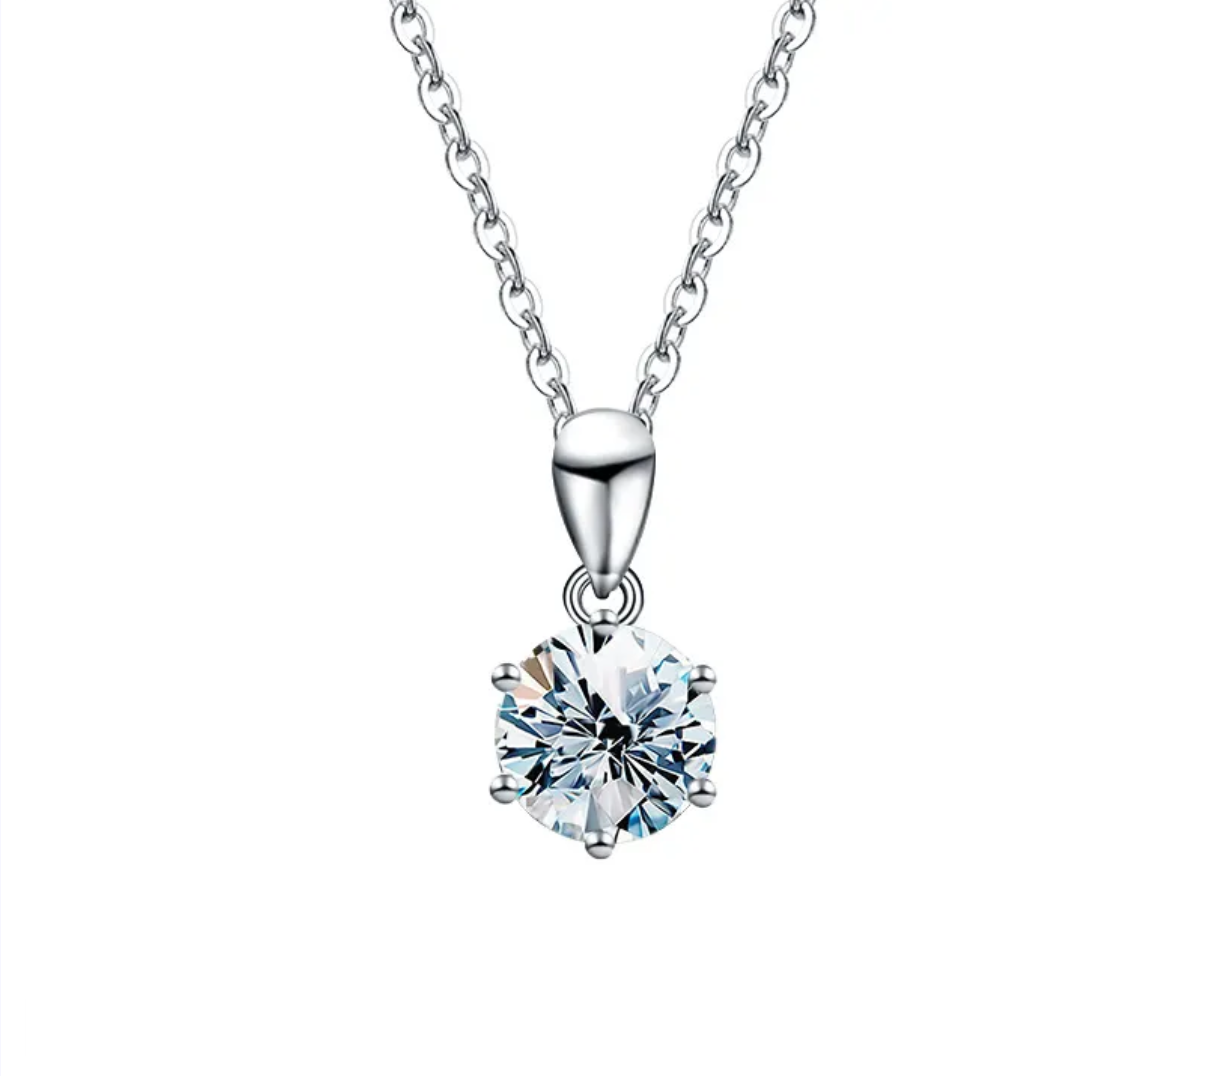 W006 - Classic Style Geometric Sterling Silver Moissanite Pendant Necklace